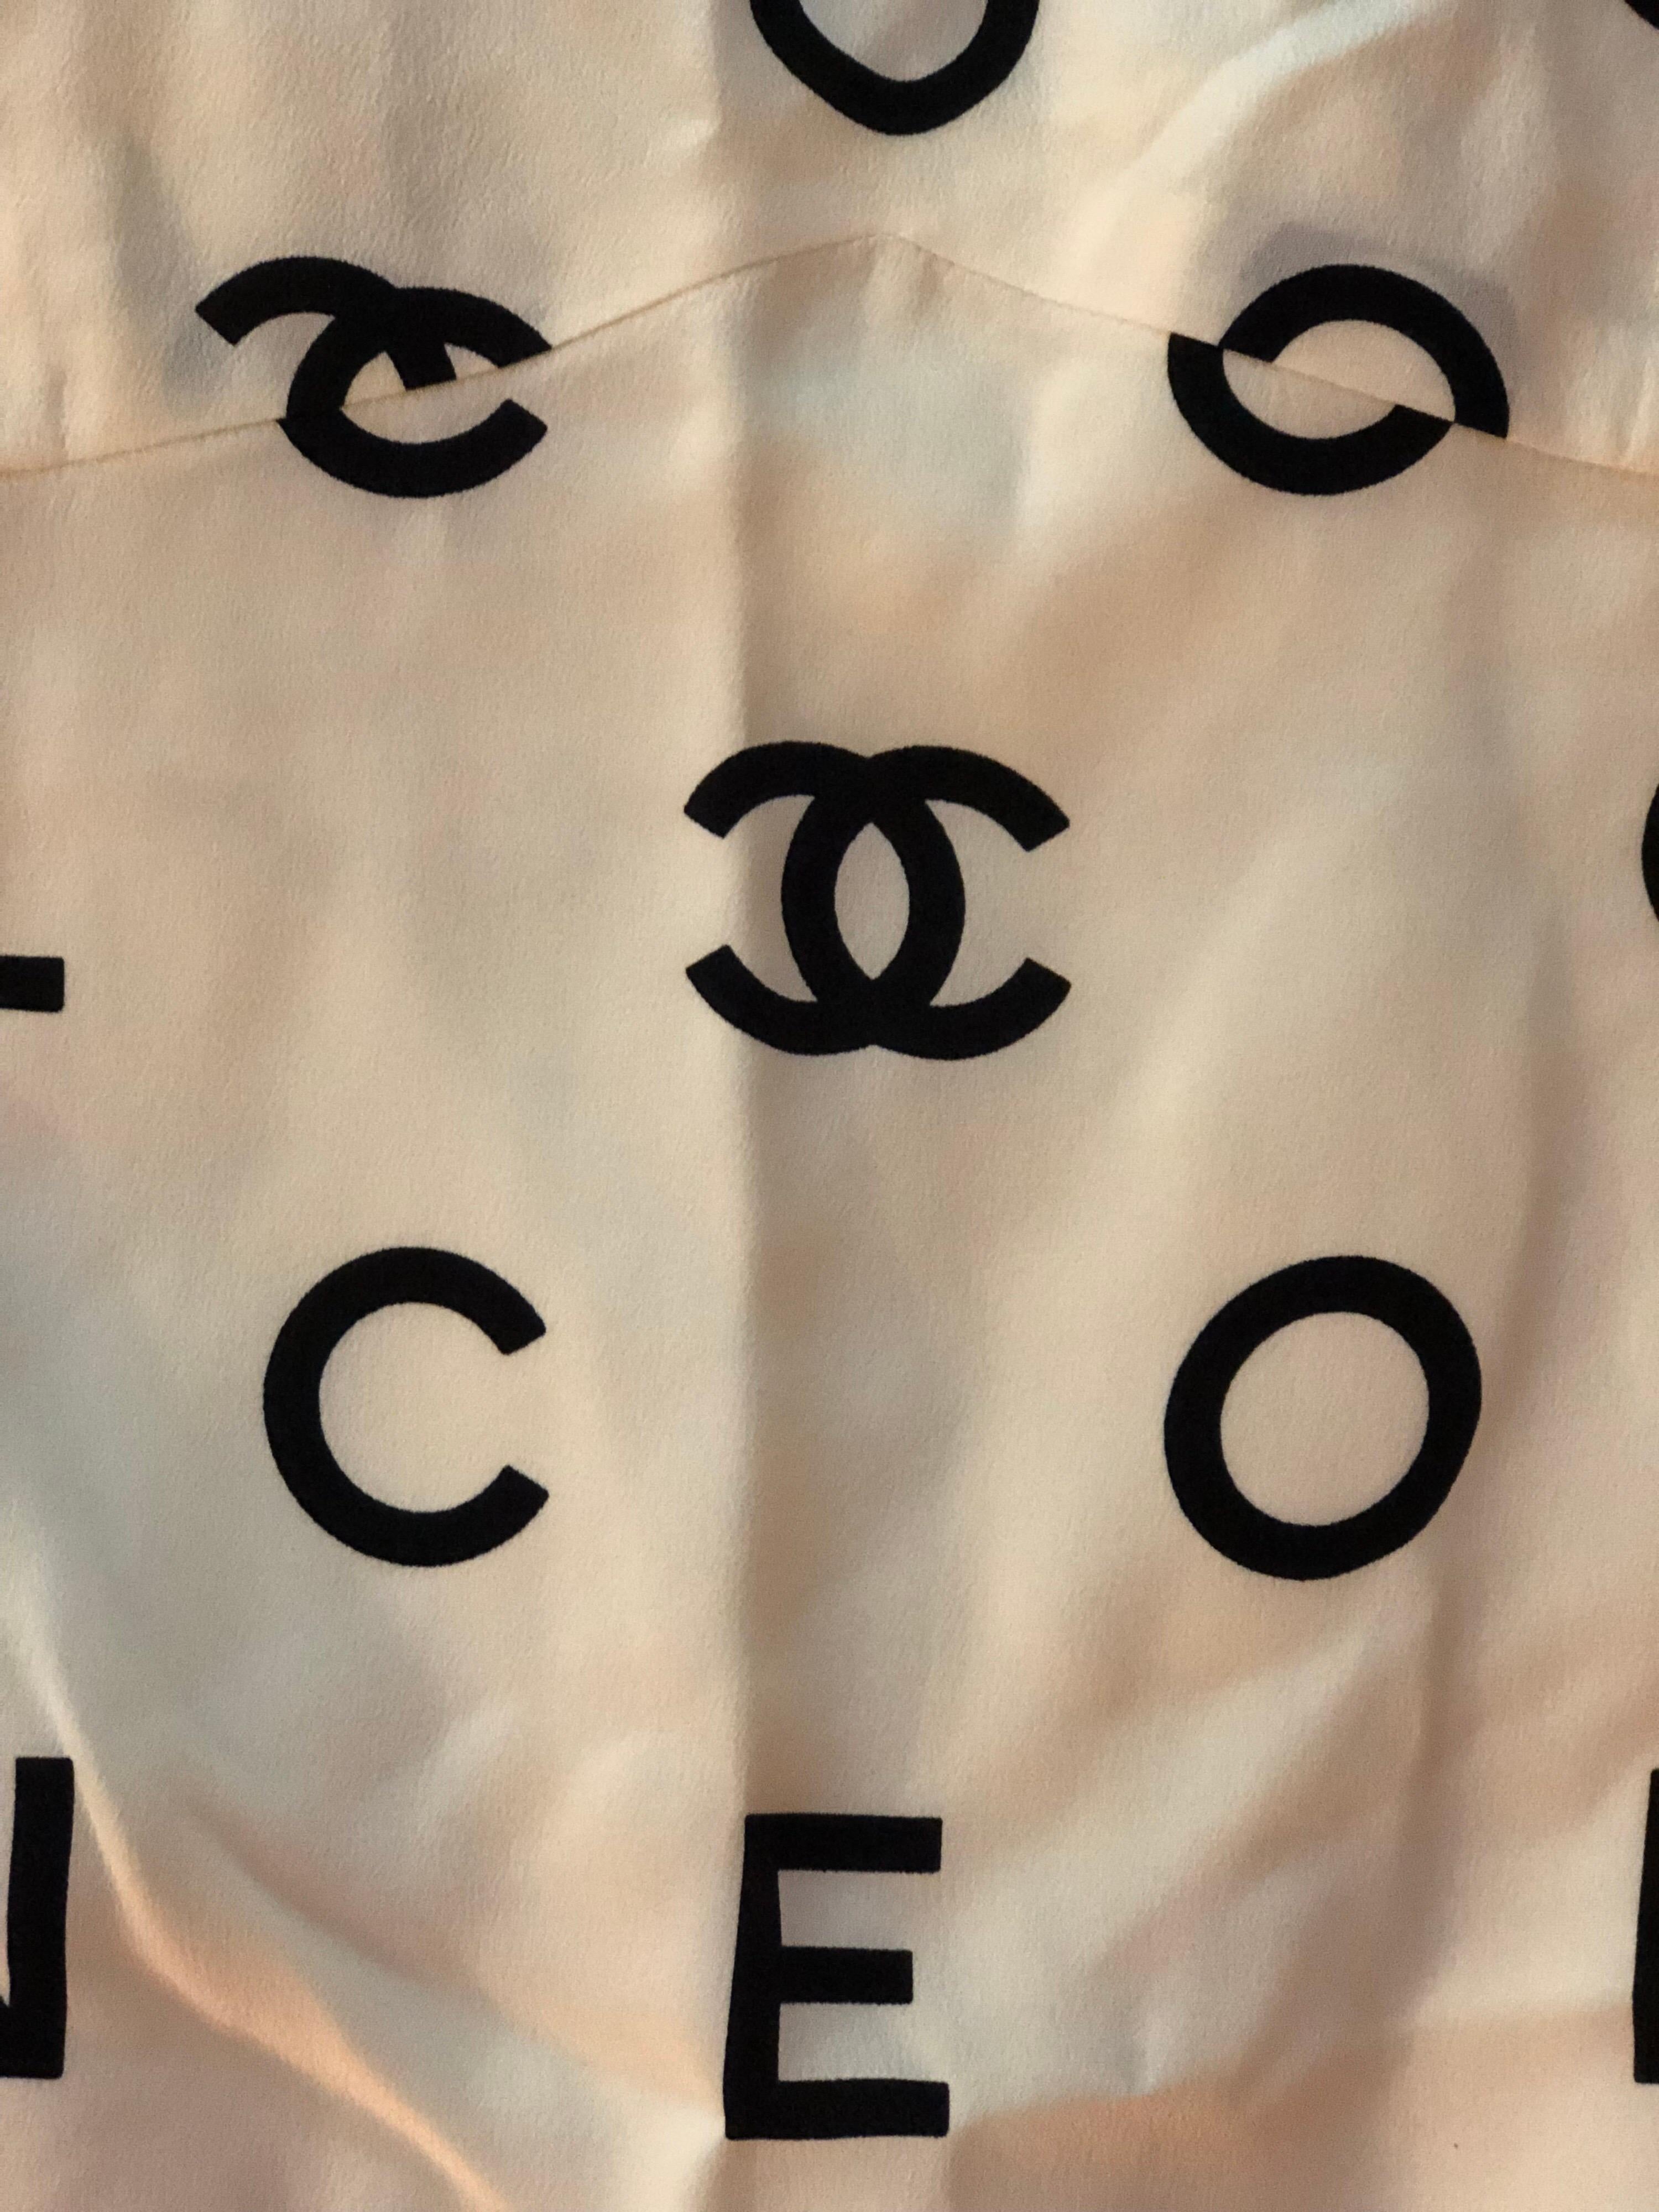 White and black CC logo camisole dress from Chanel Vintage featuring spaghetti straps, a v-neck, an all over logo print, a straight hem and a short length.

ABOUT CHANEL

Founded by Gabrielle 'Coco' Chanel in 1909 and led by Karl Lagerfeld since the